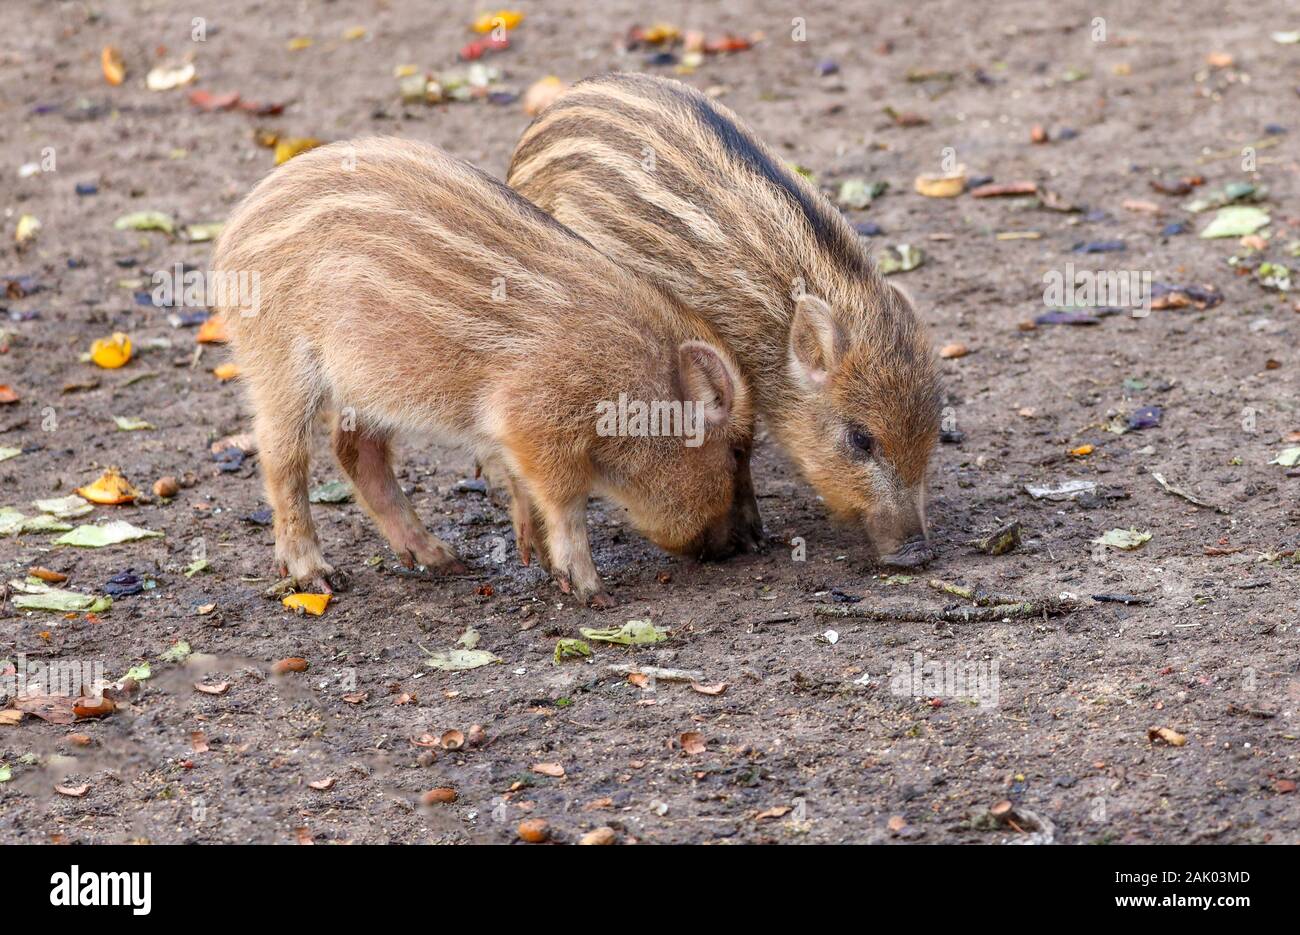 The two young wild boars are not bothered by the food. Stock Photo